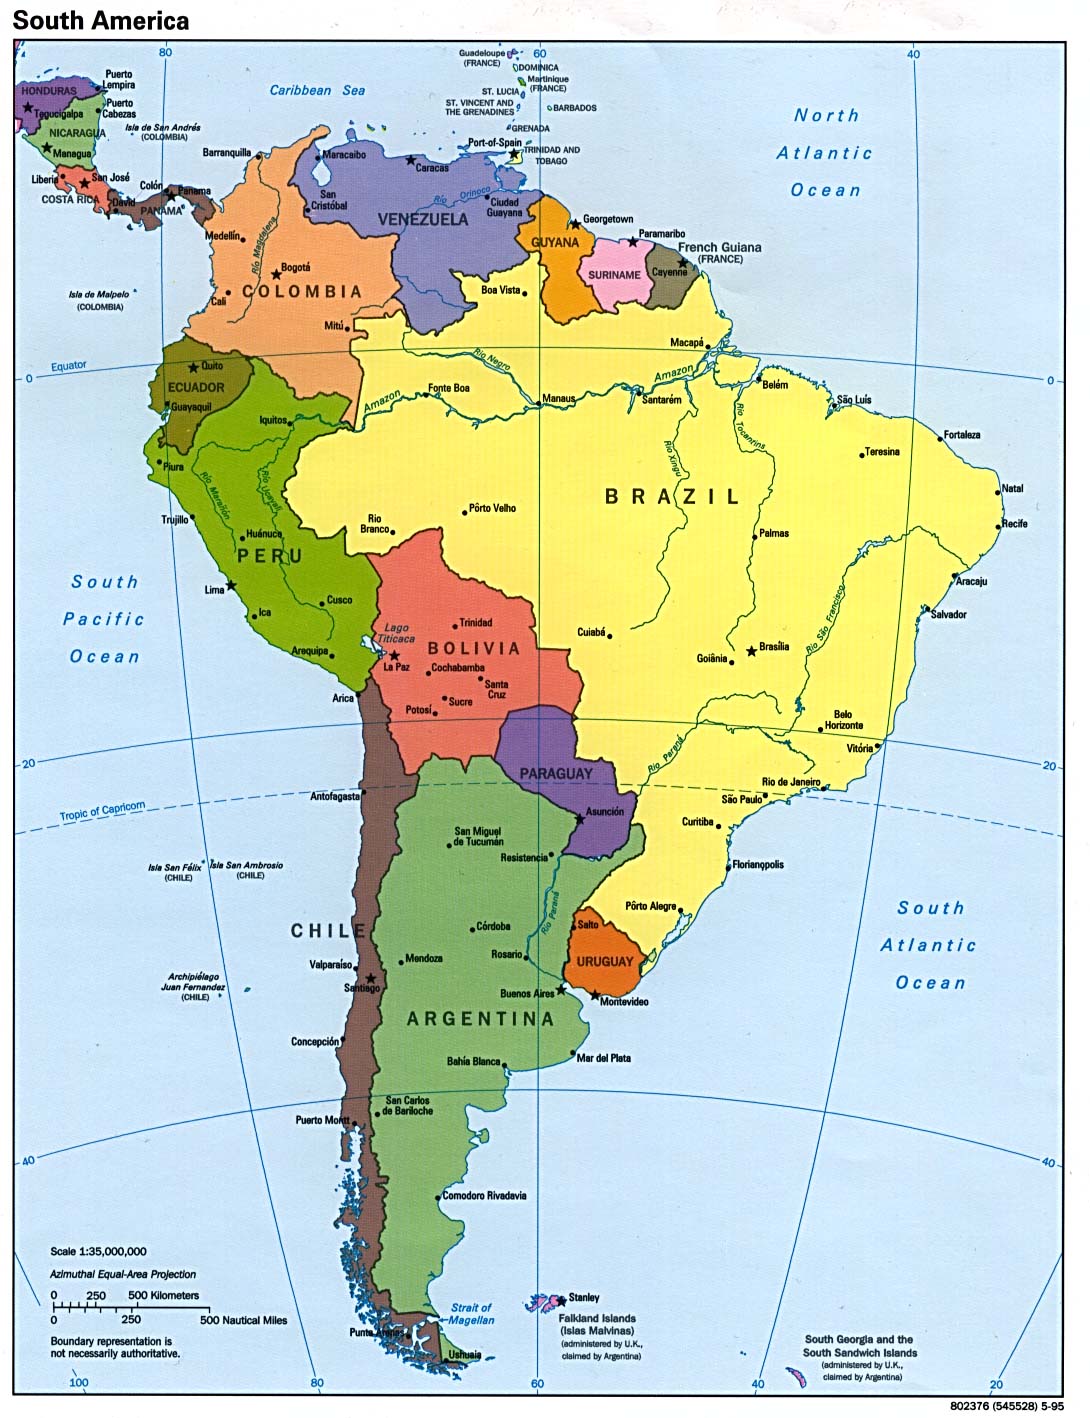 Another Political Map of South America